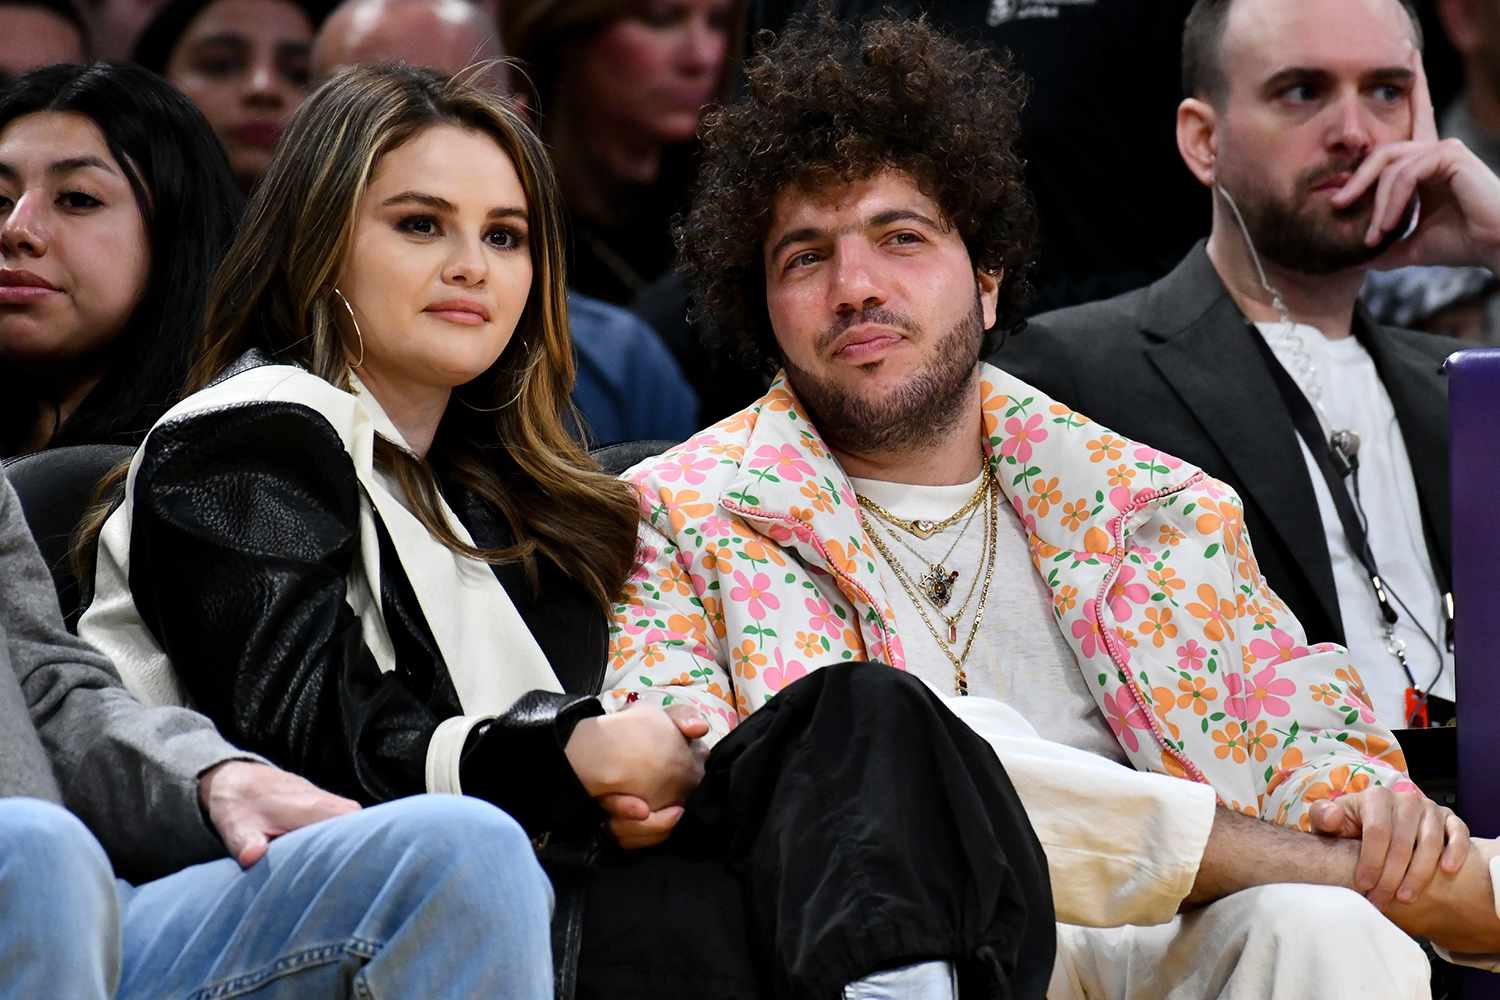 Selena Gomez Shares Romantic Tissue Paper Note from Benny Blanco: 'I Made You Steak'